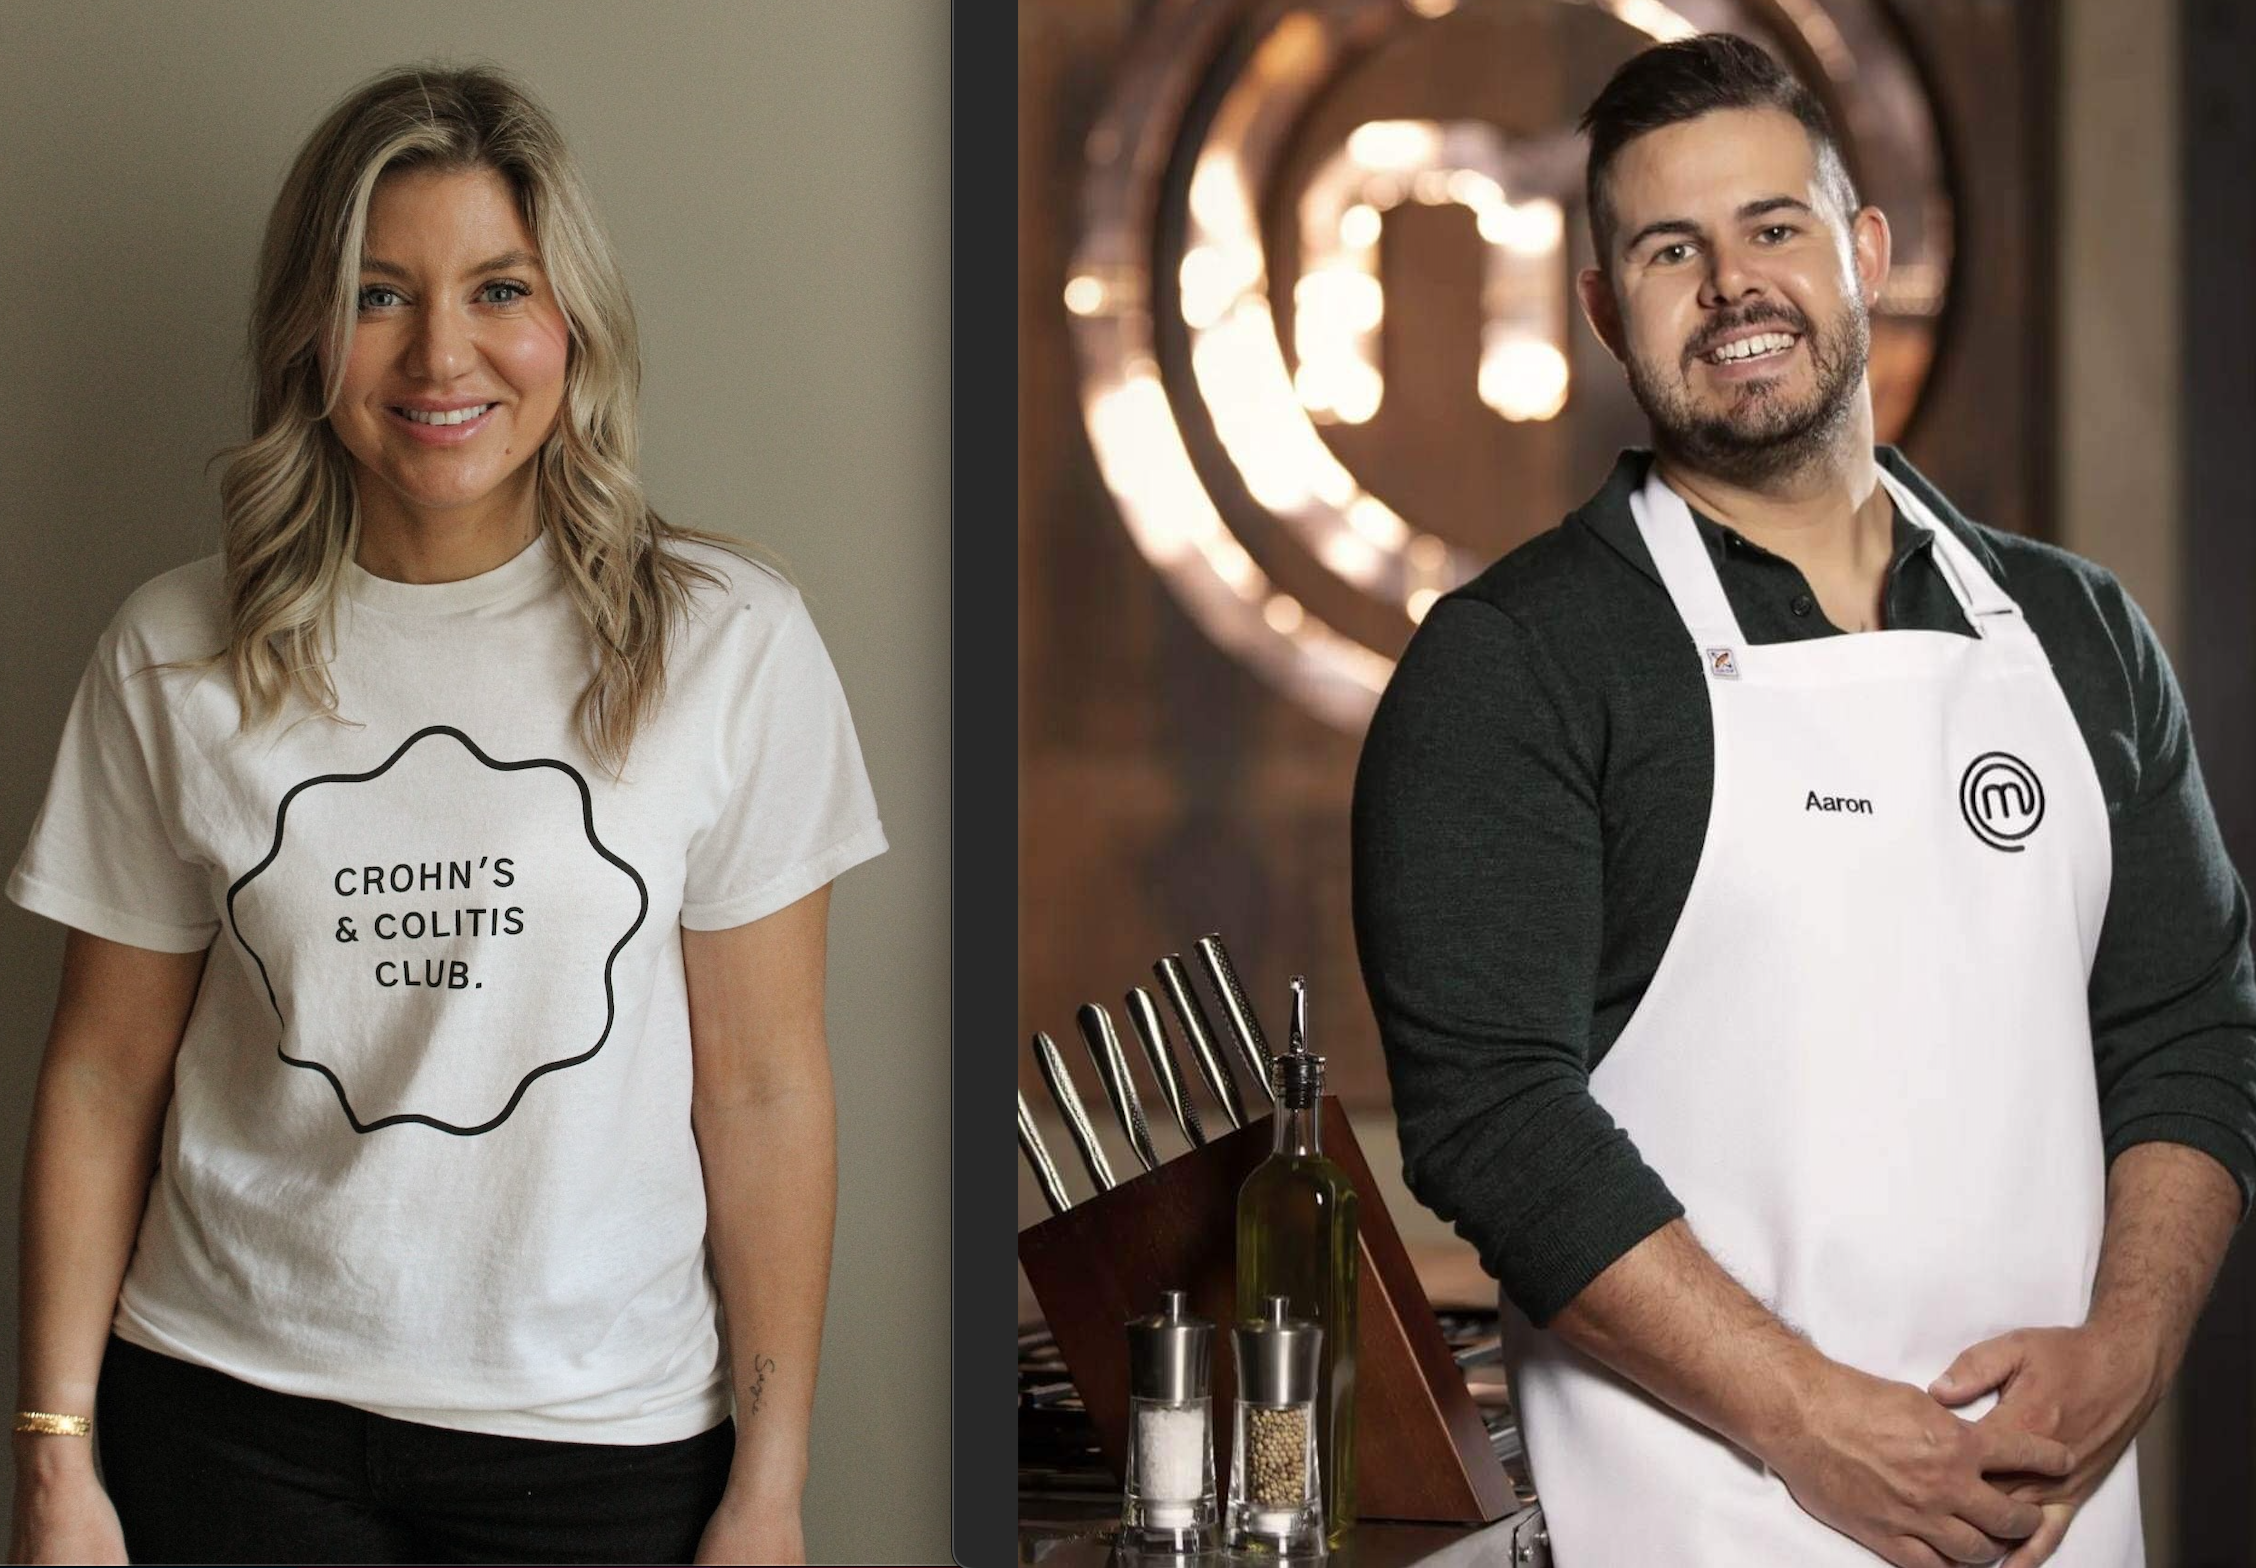 A caucasian woman with long blonde hair wearing a white shirt and black pants stands against a white wall, she is smiling, and a man stands next to her. He is caucasian and is wearing a white MasterChef Australia apron and a black long sleeved shirt, he has short brown hair and beard and is smiling.